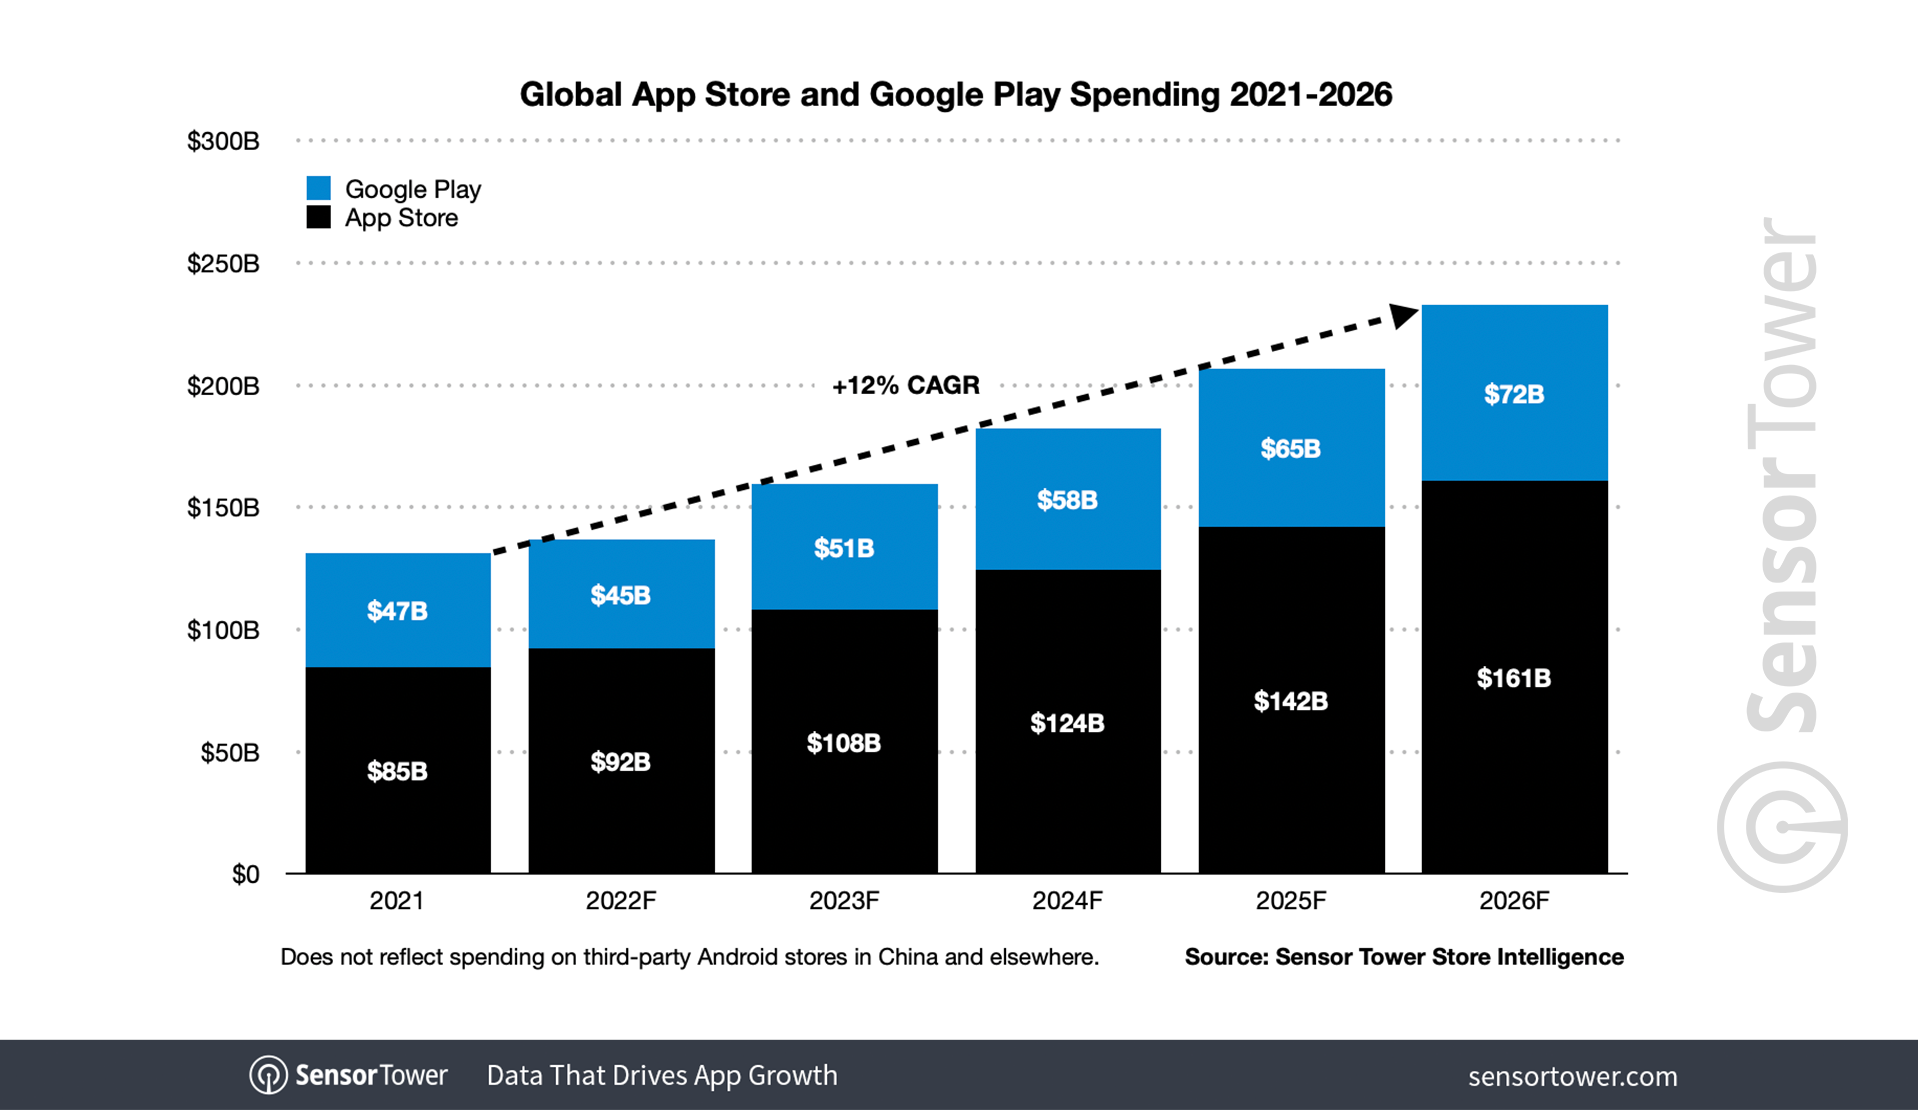 5-Year Forecast: App Spending To Reach 3B by 2026